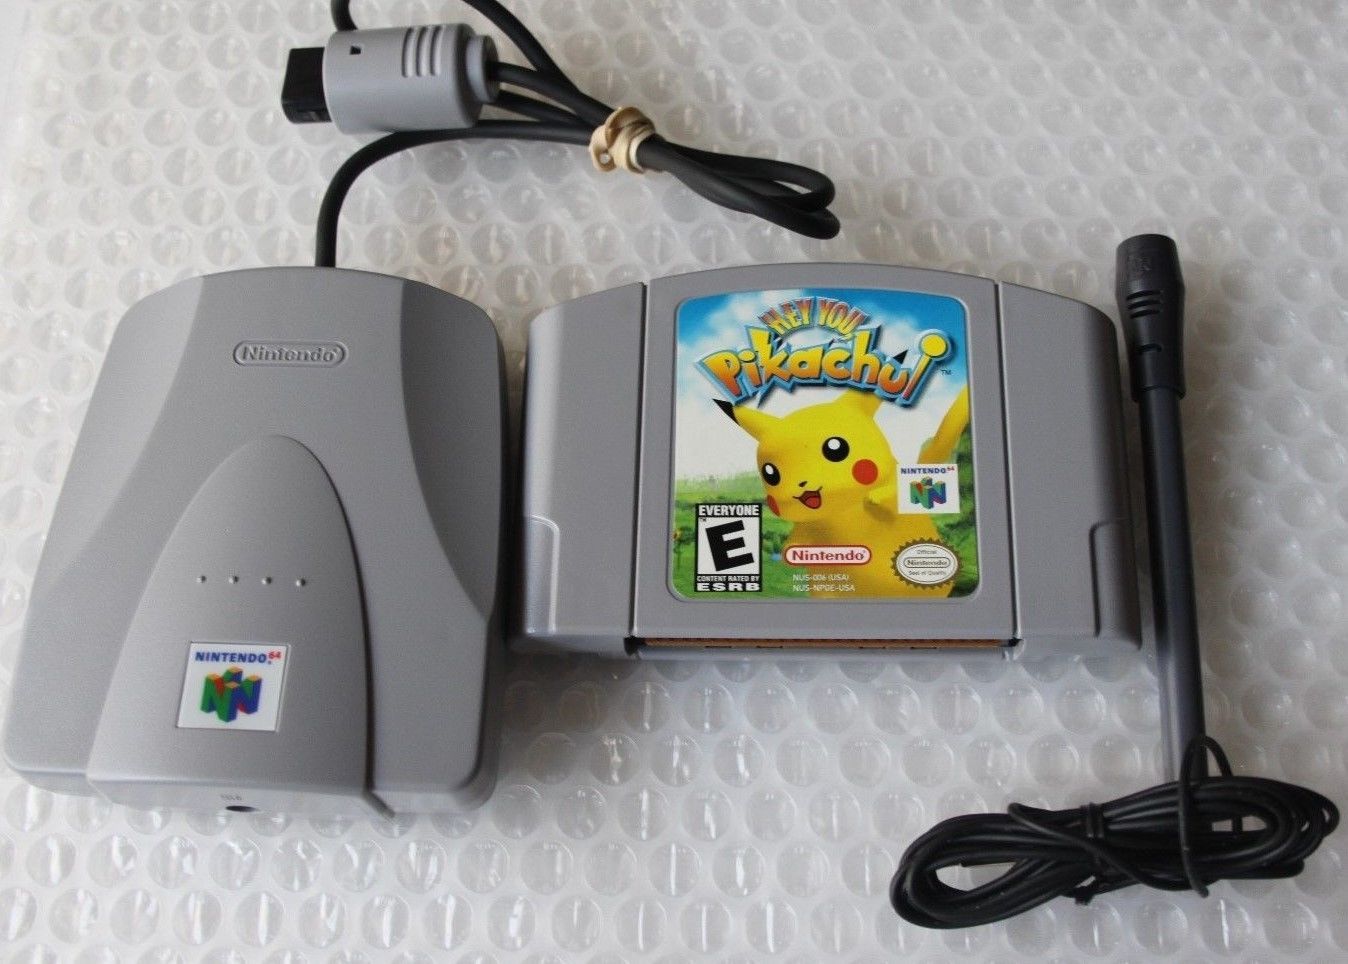 25 Things Only Super Fans Knew The N64 Could Do